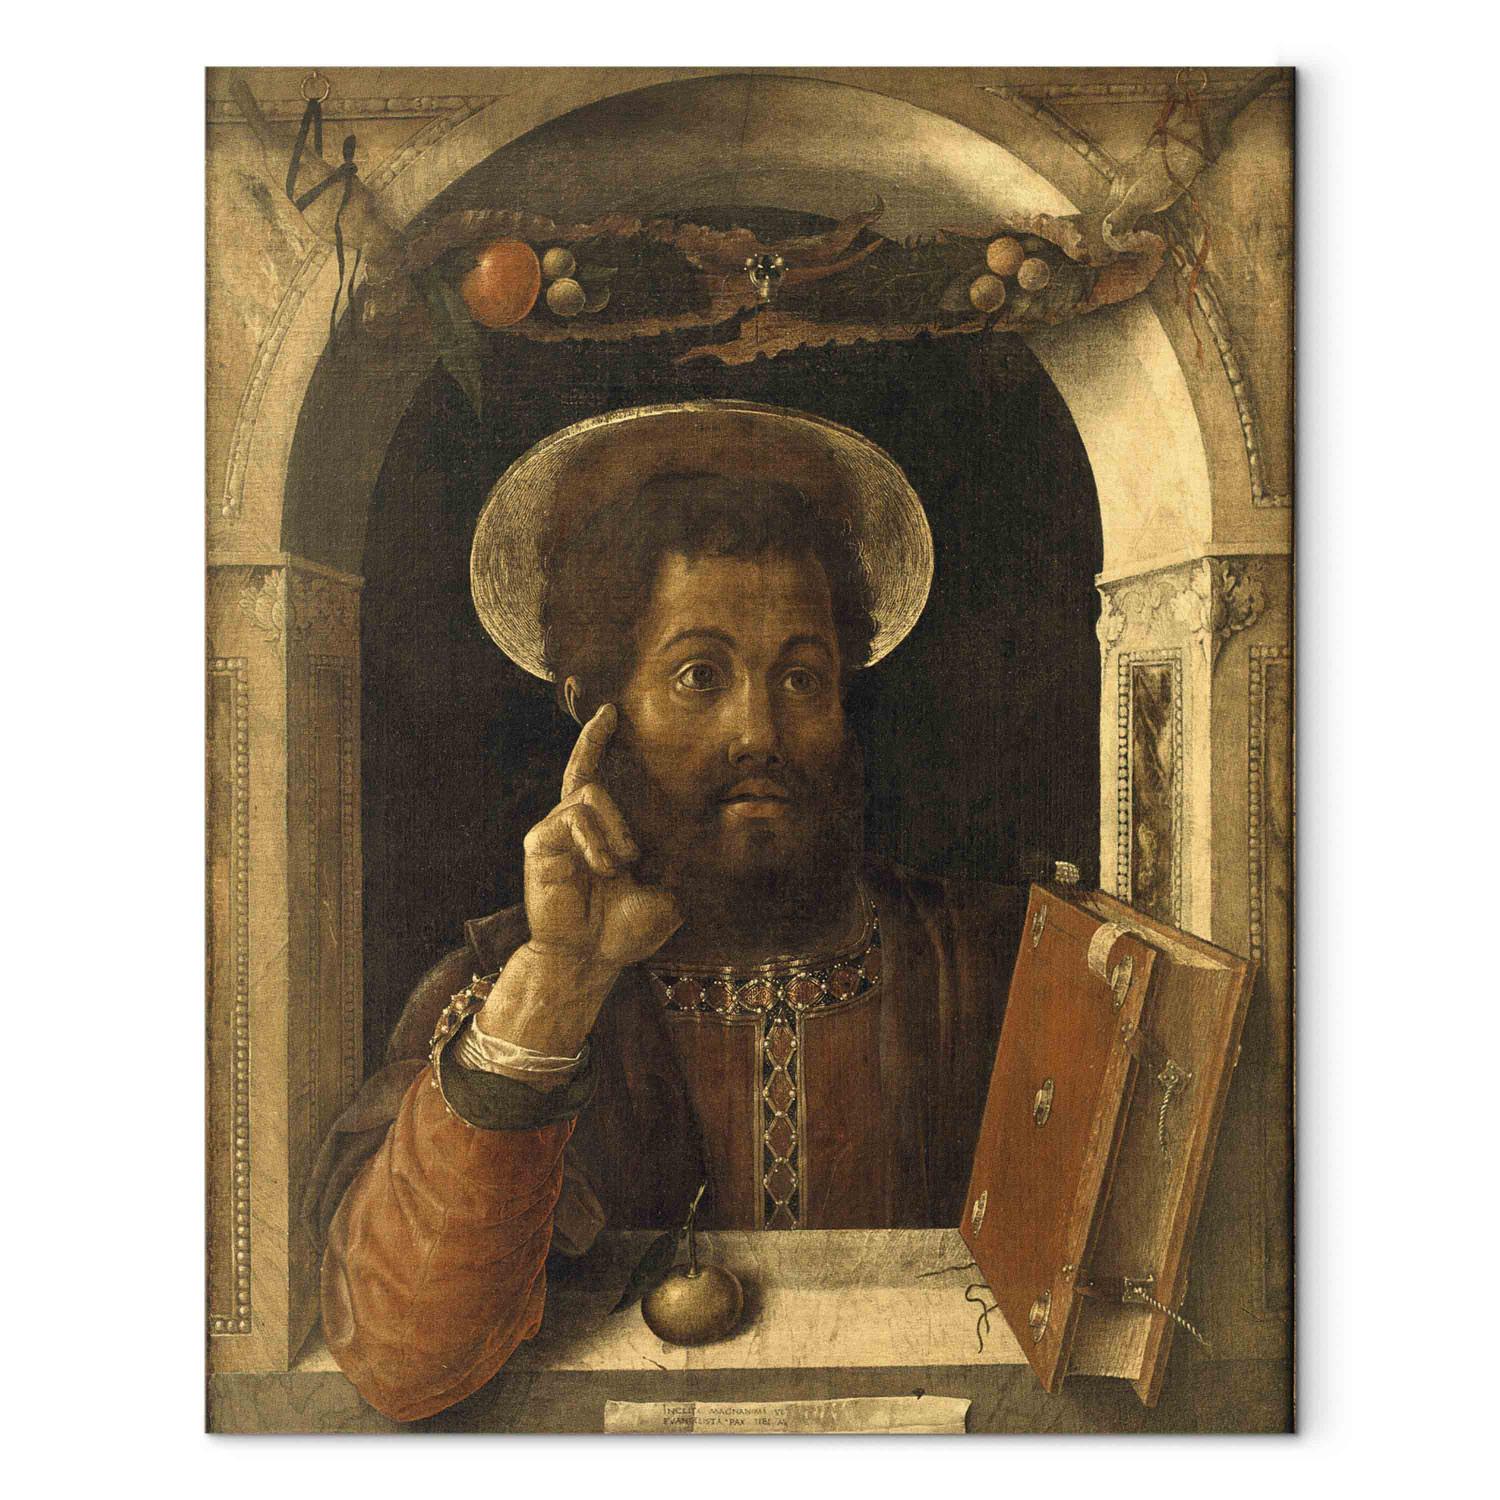 Canvas Halflength portait of an apostle in a window frame